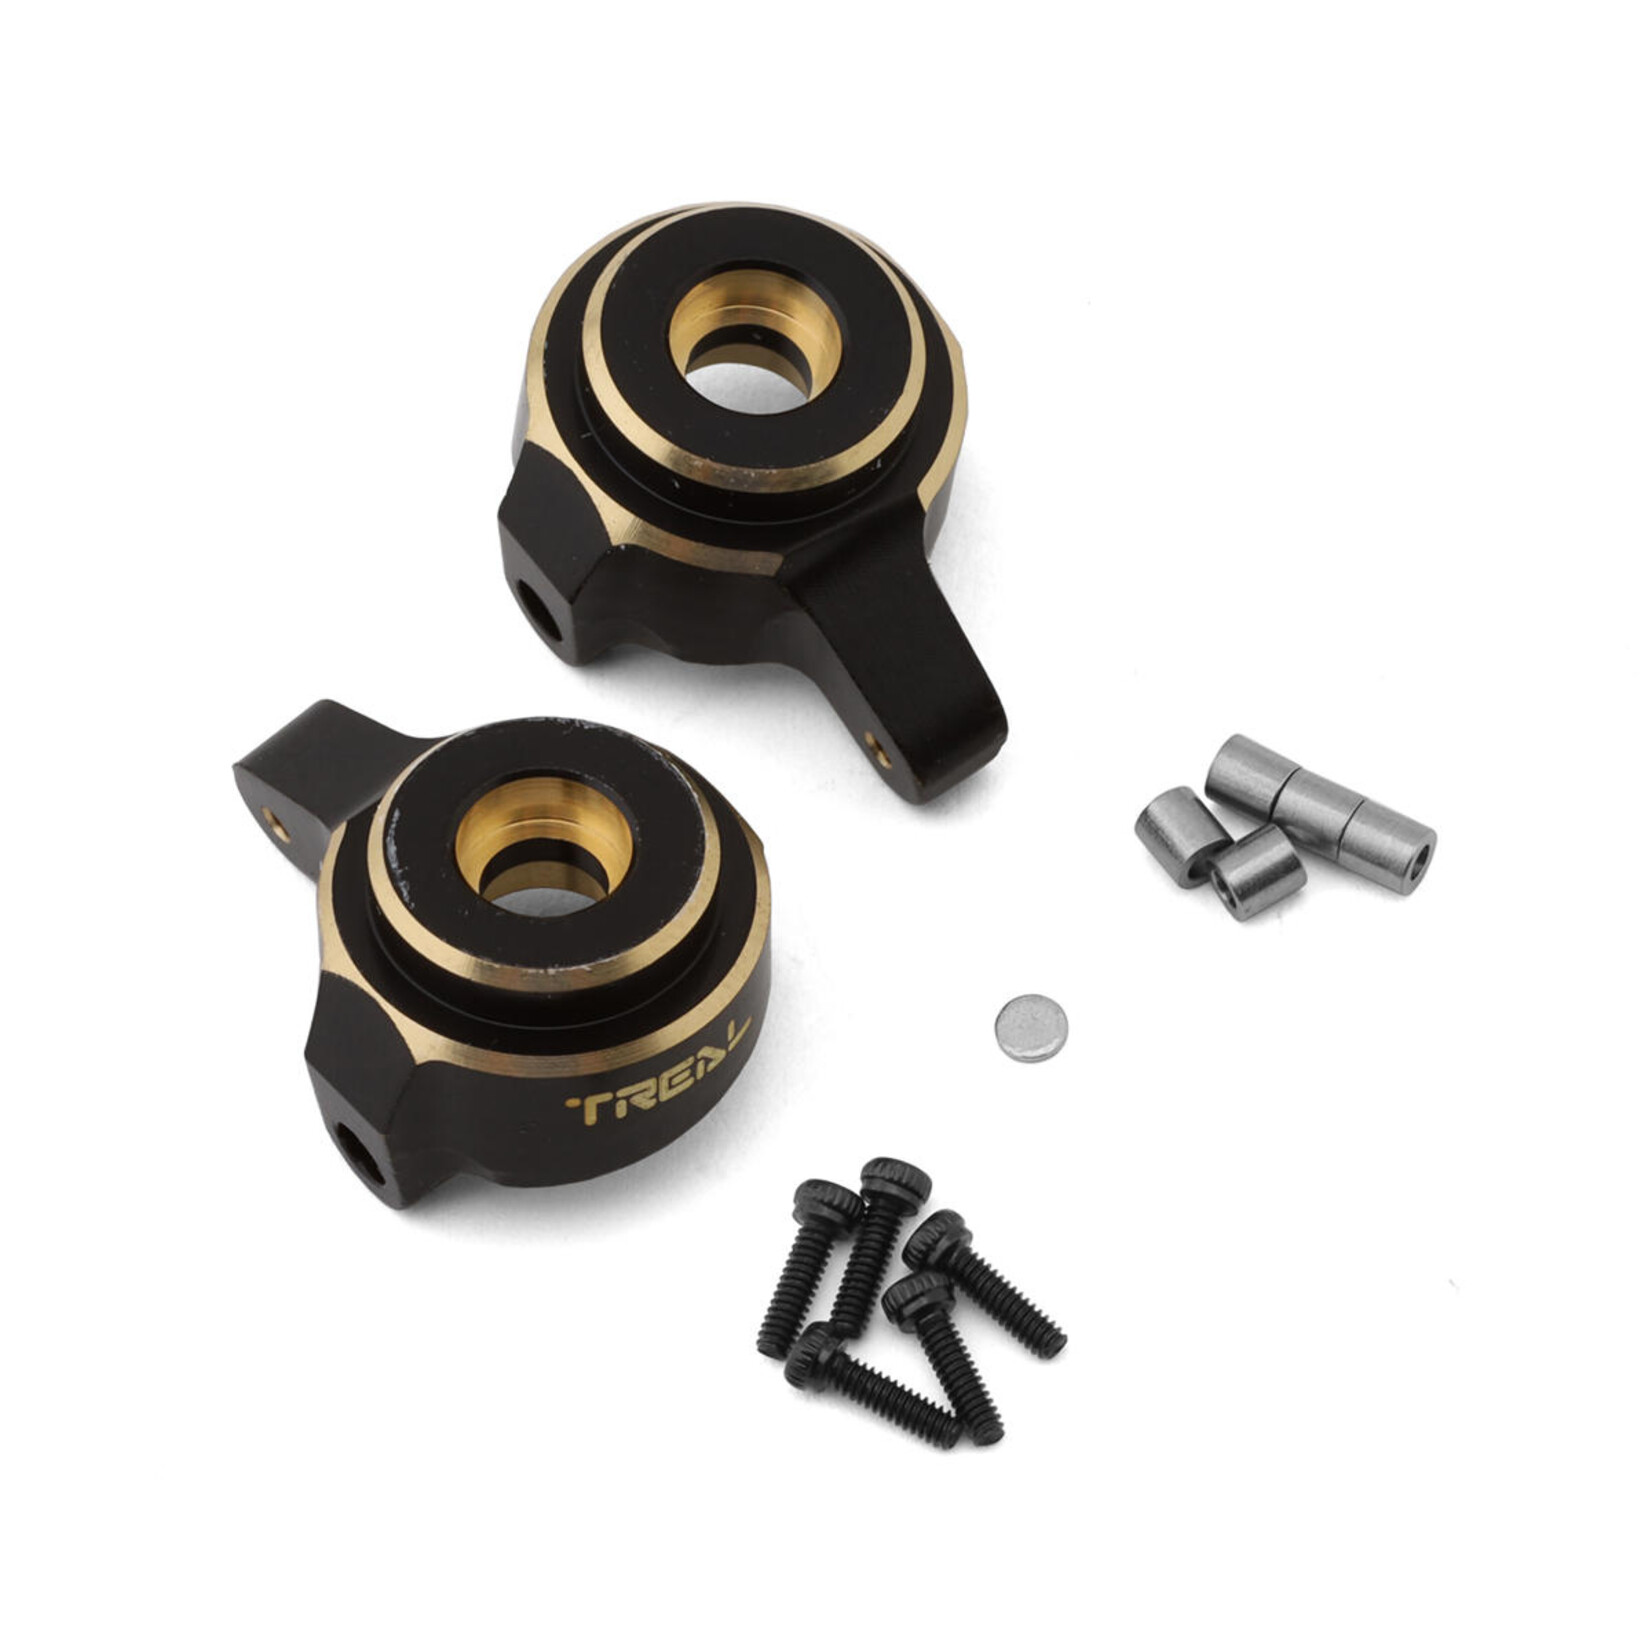 Treal Treal Hobby Axial SCX24 Brass Front Steering Knuckles (Black) (2) (10g) #X002MHU5DR